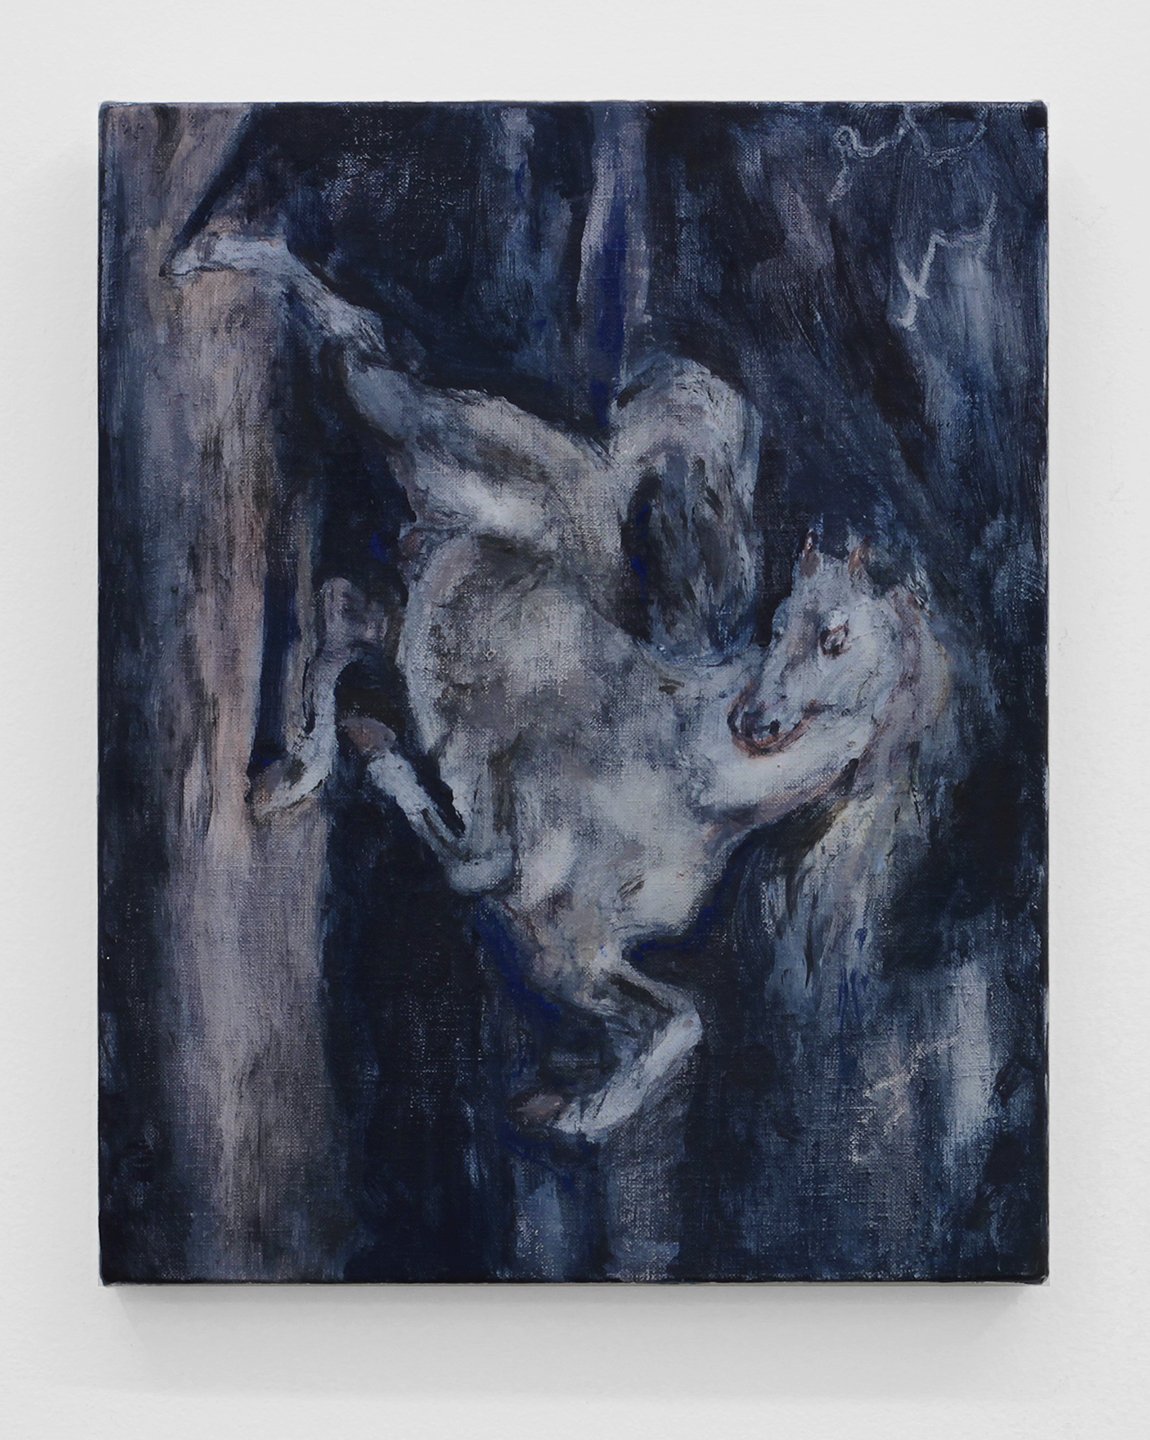  Falling Horse (After Delacroix)  2019  Distemper on canvas  10 x 8 inches  (25.4 x 20.32 cm) 